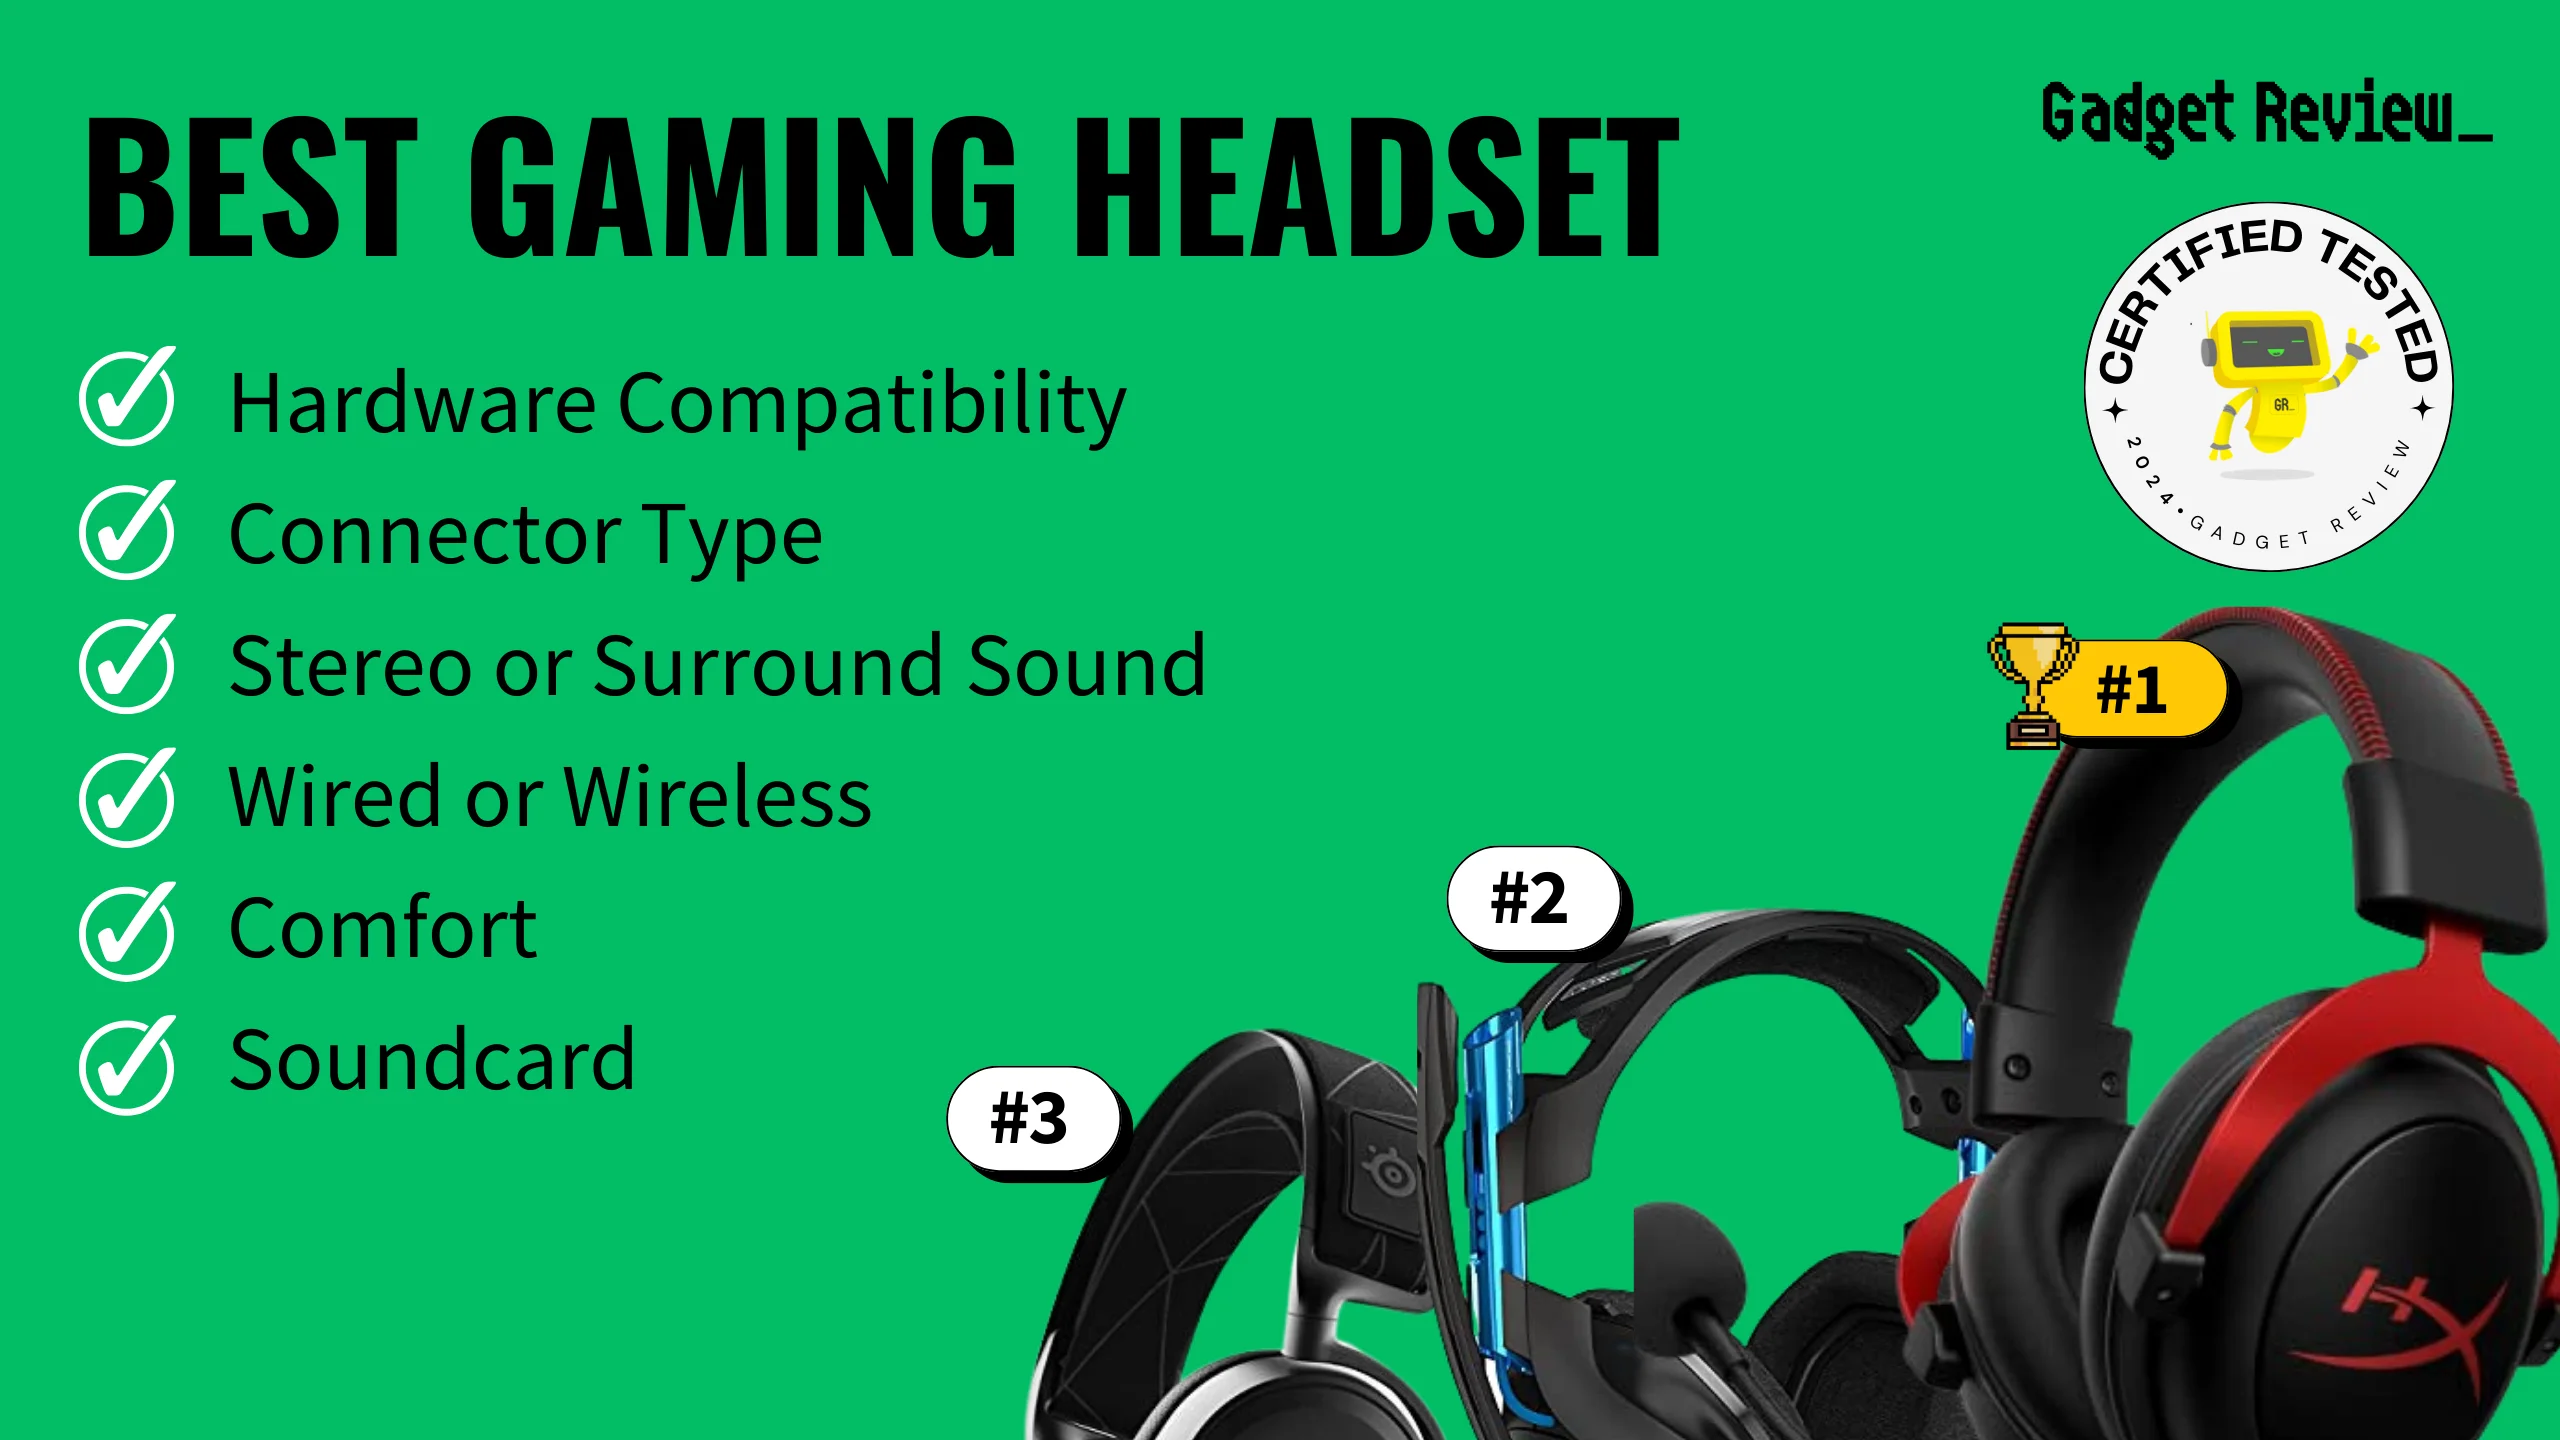 best gaming headset guide that shows the top best gaming headset model